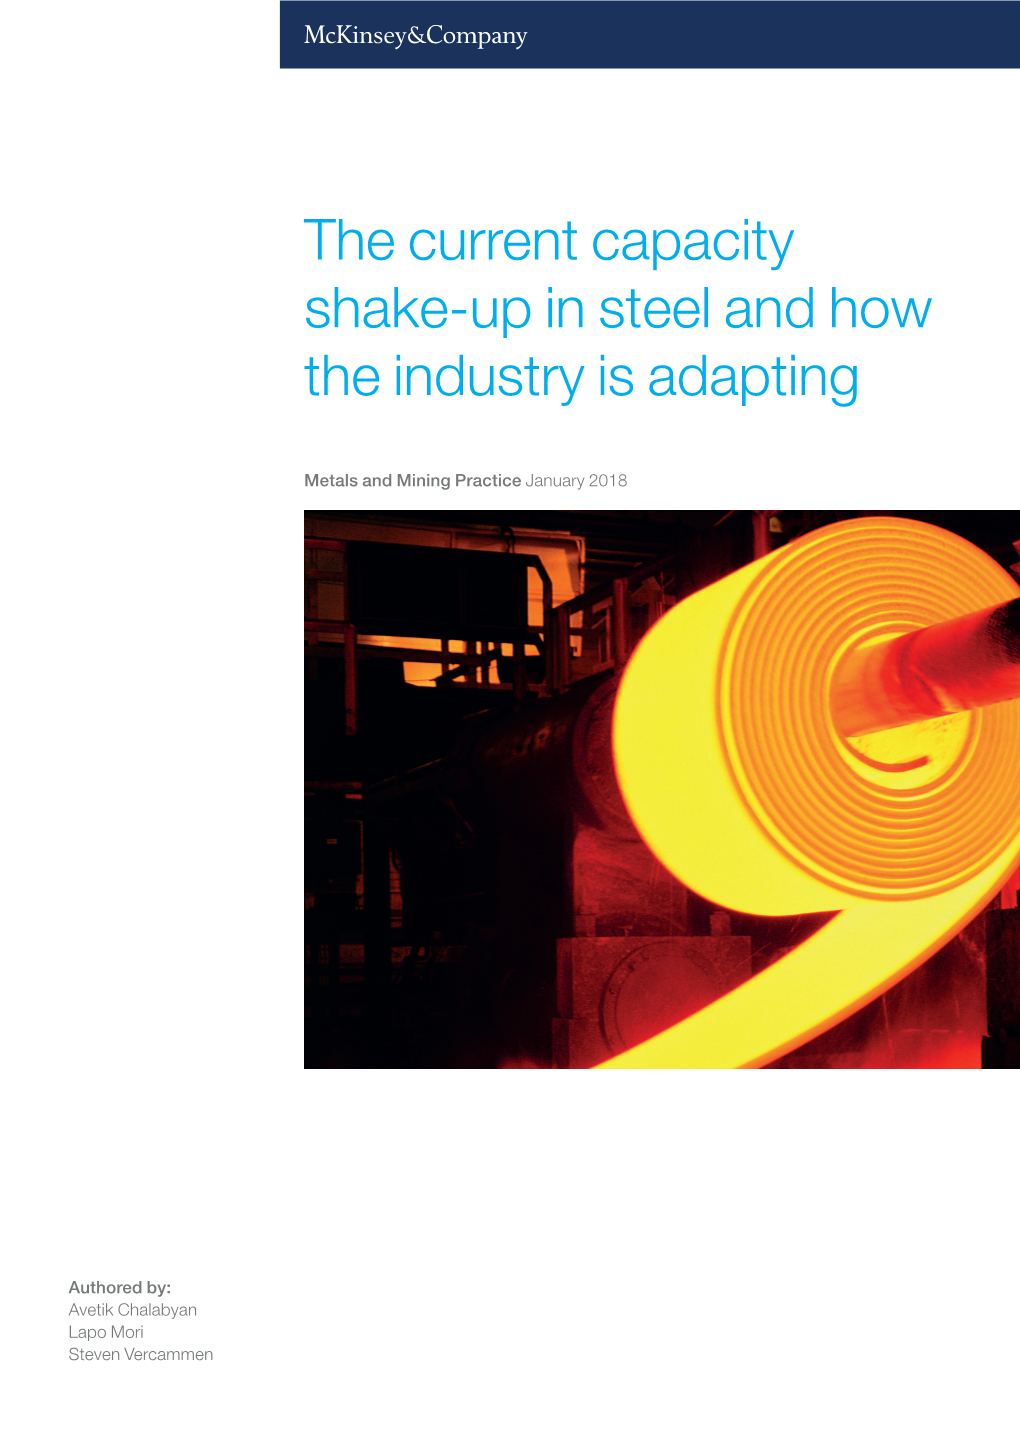 The Current Capacity Shake-Up in Steel and How the Industry Is Adapting